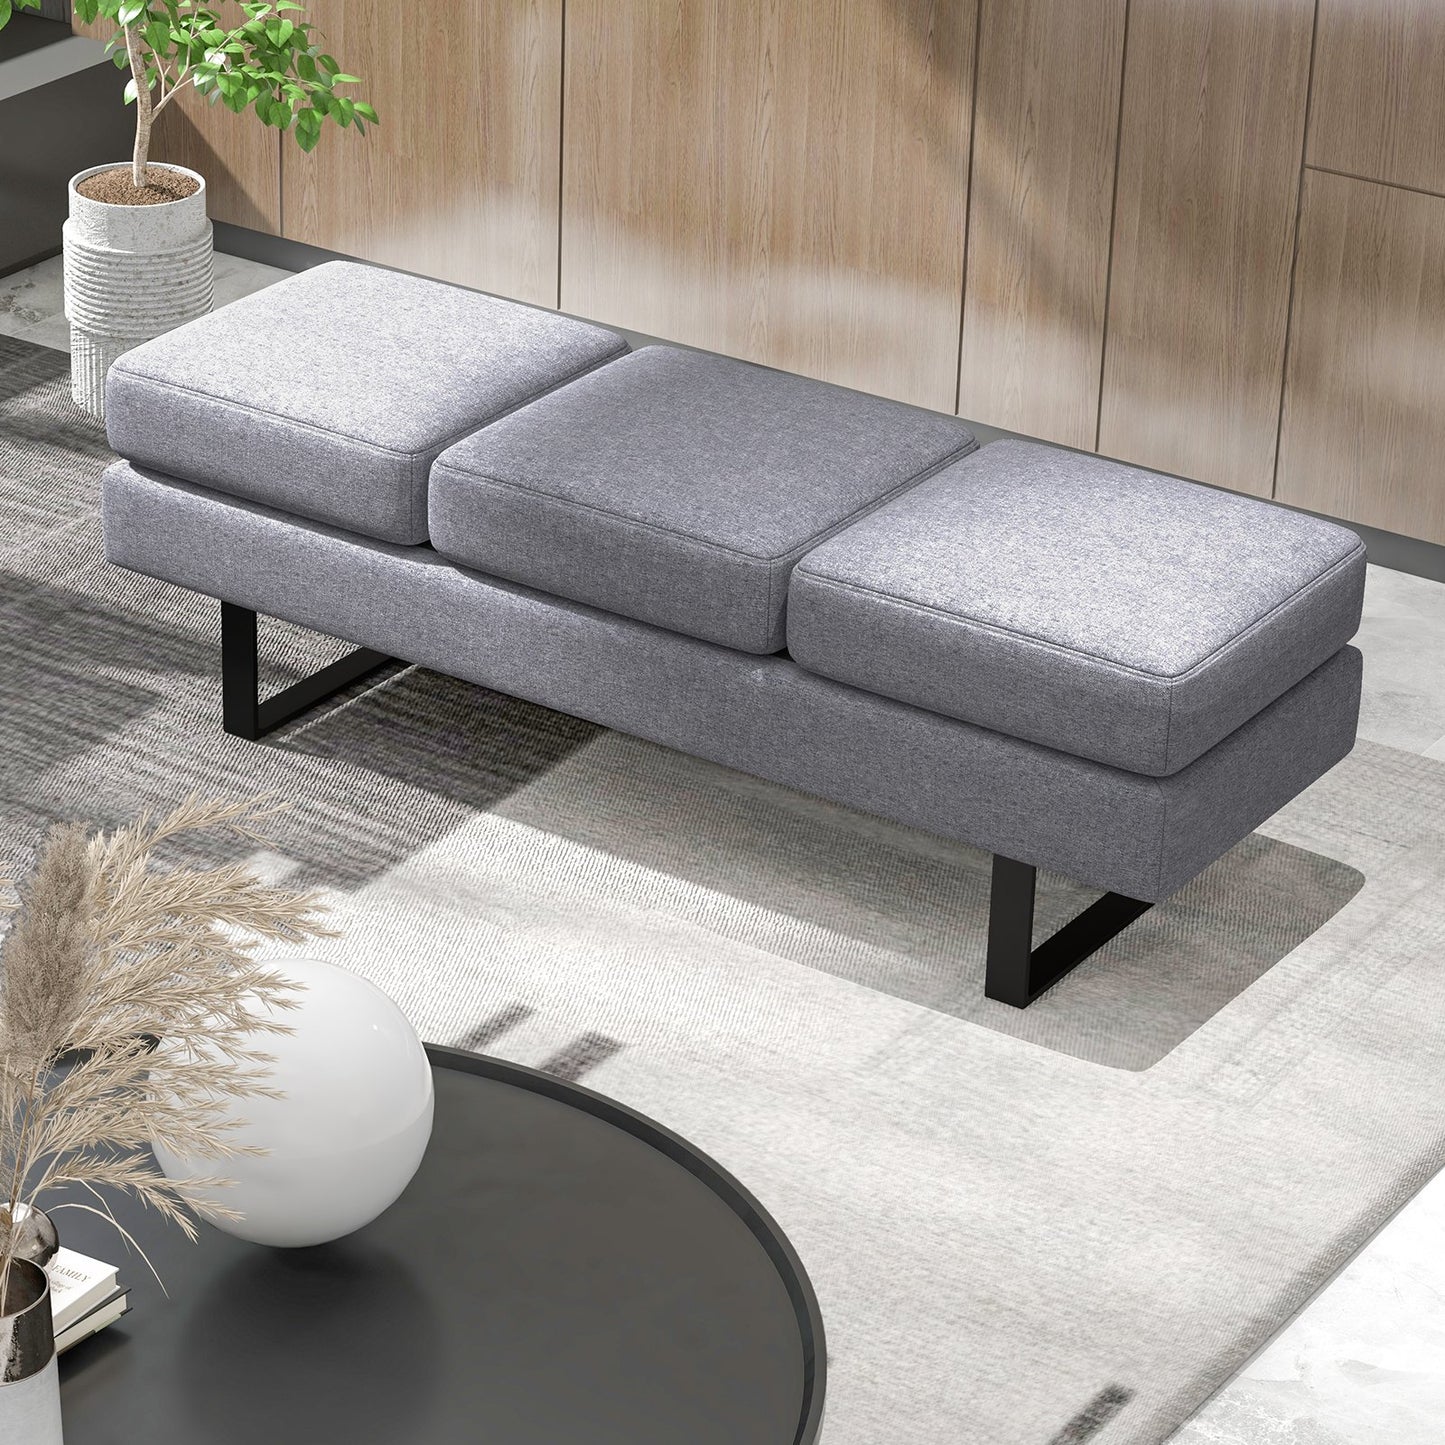 Waiting Room Bench Seating Long Bench with Metal Frame Leg, Gray